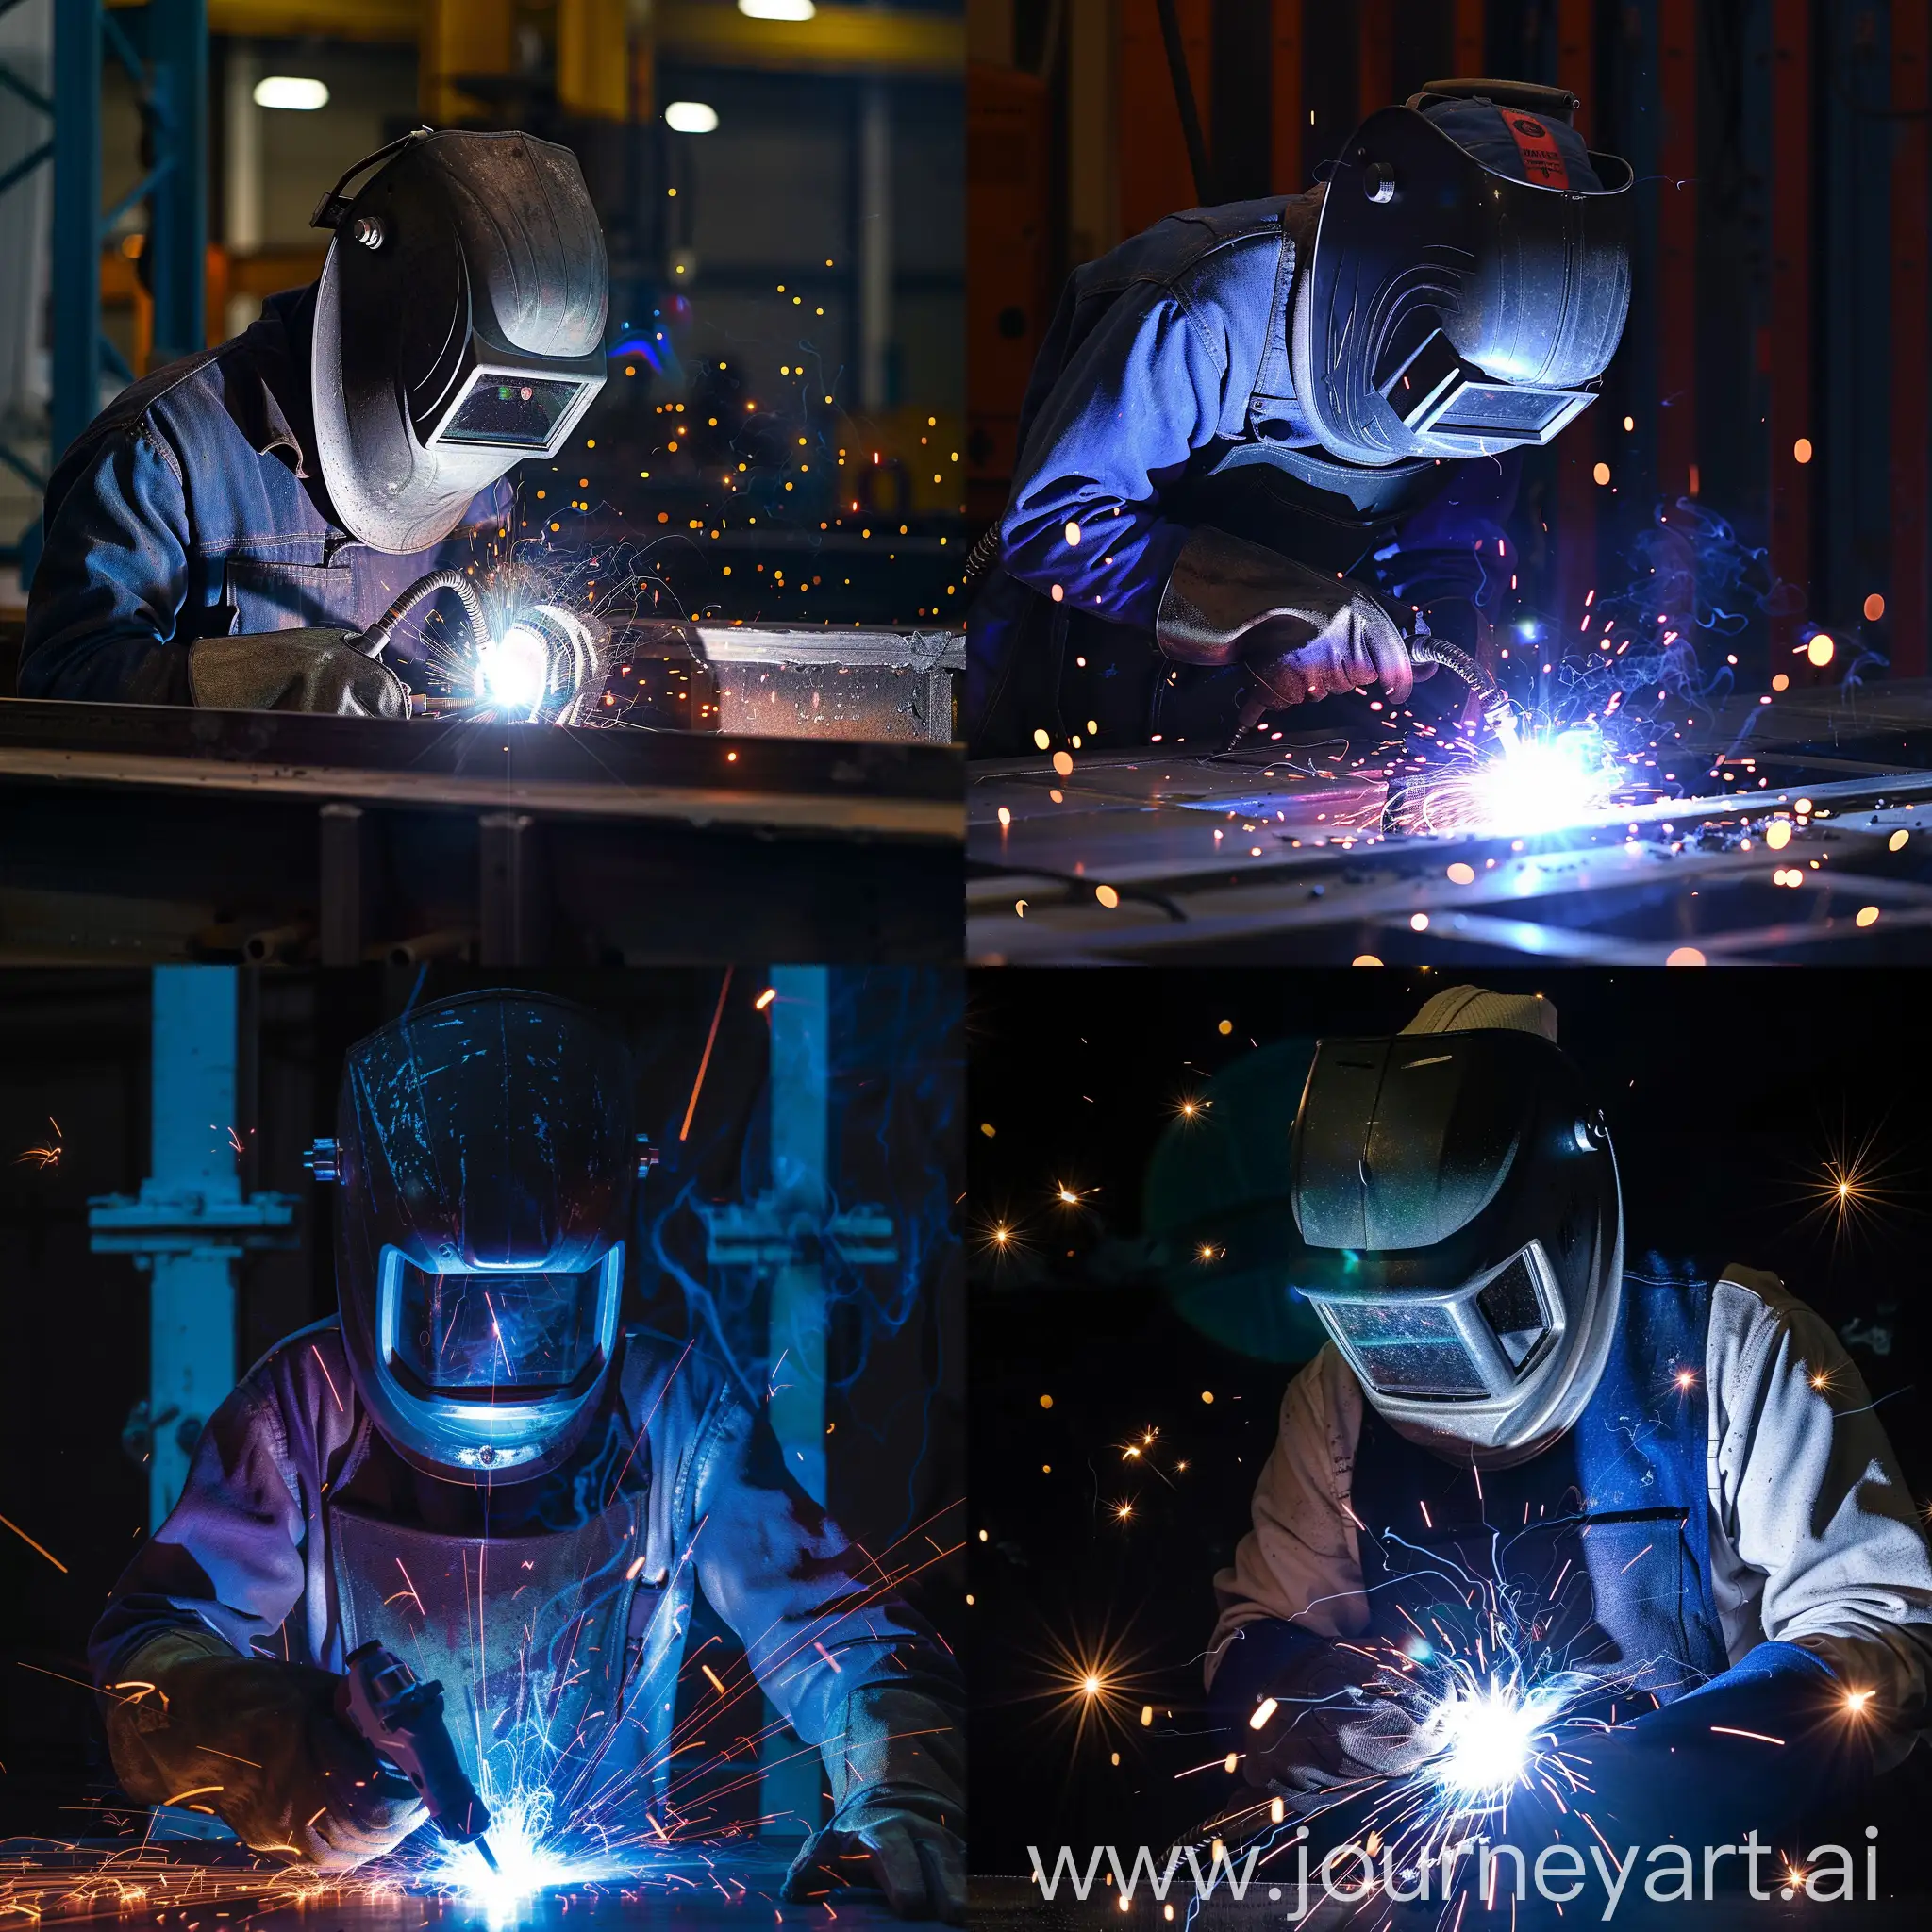 Professional-Welder-Working-with-Precision-and-Focus